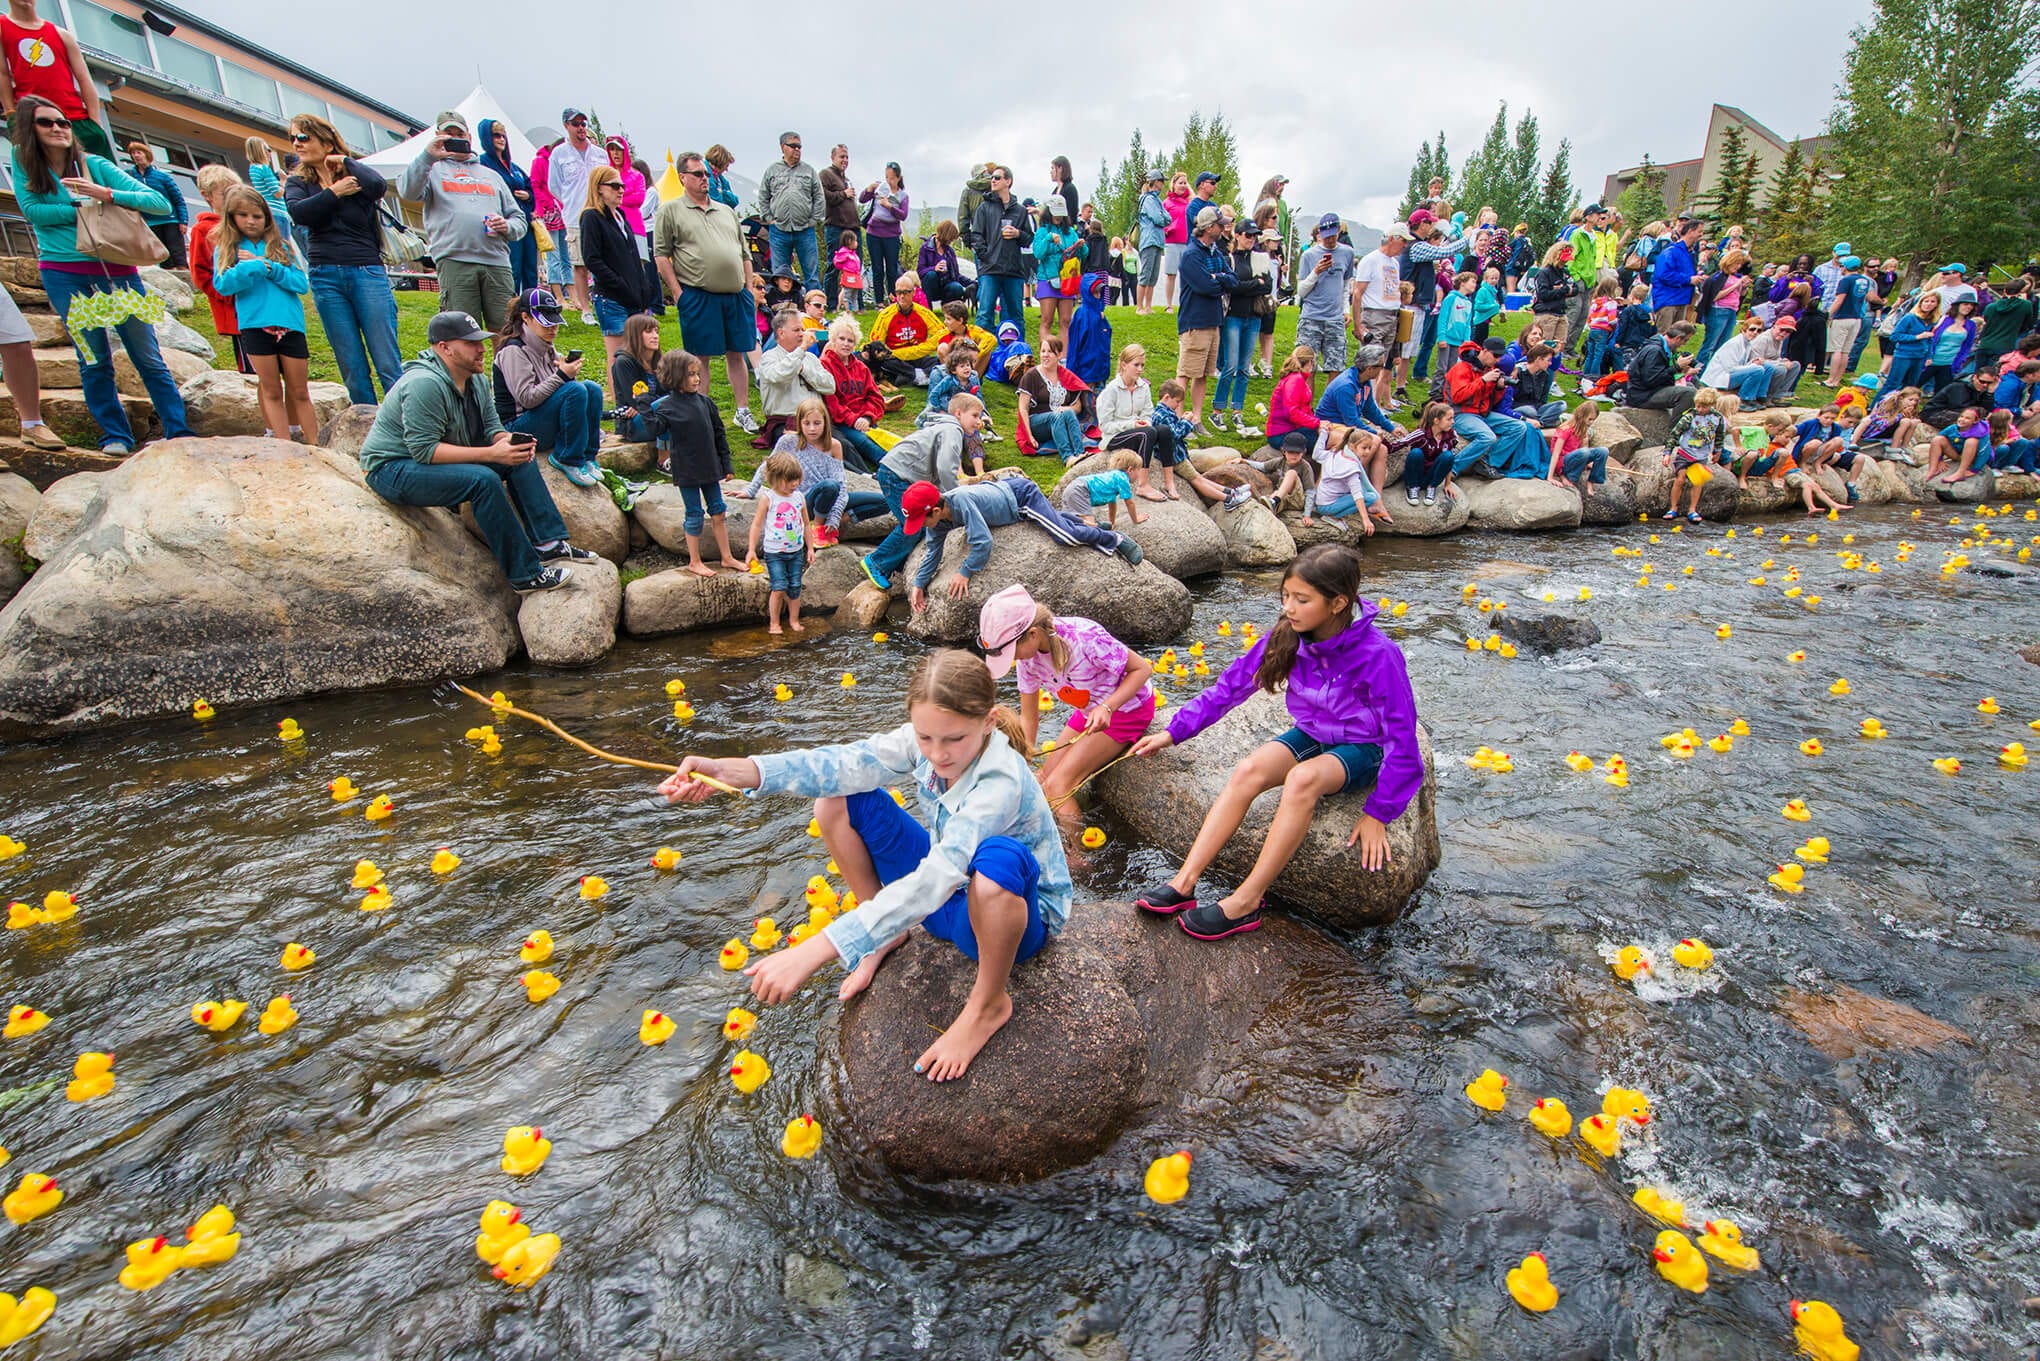 Kids sitting on rocks during the Labor Day Duck Race taking place on the Blue River in Breckenridge.